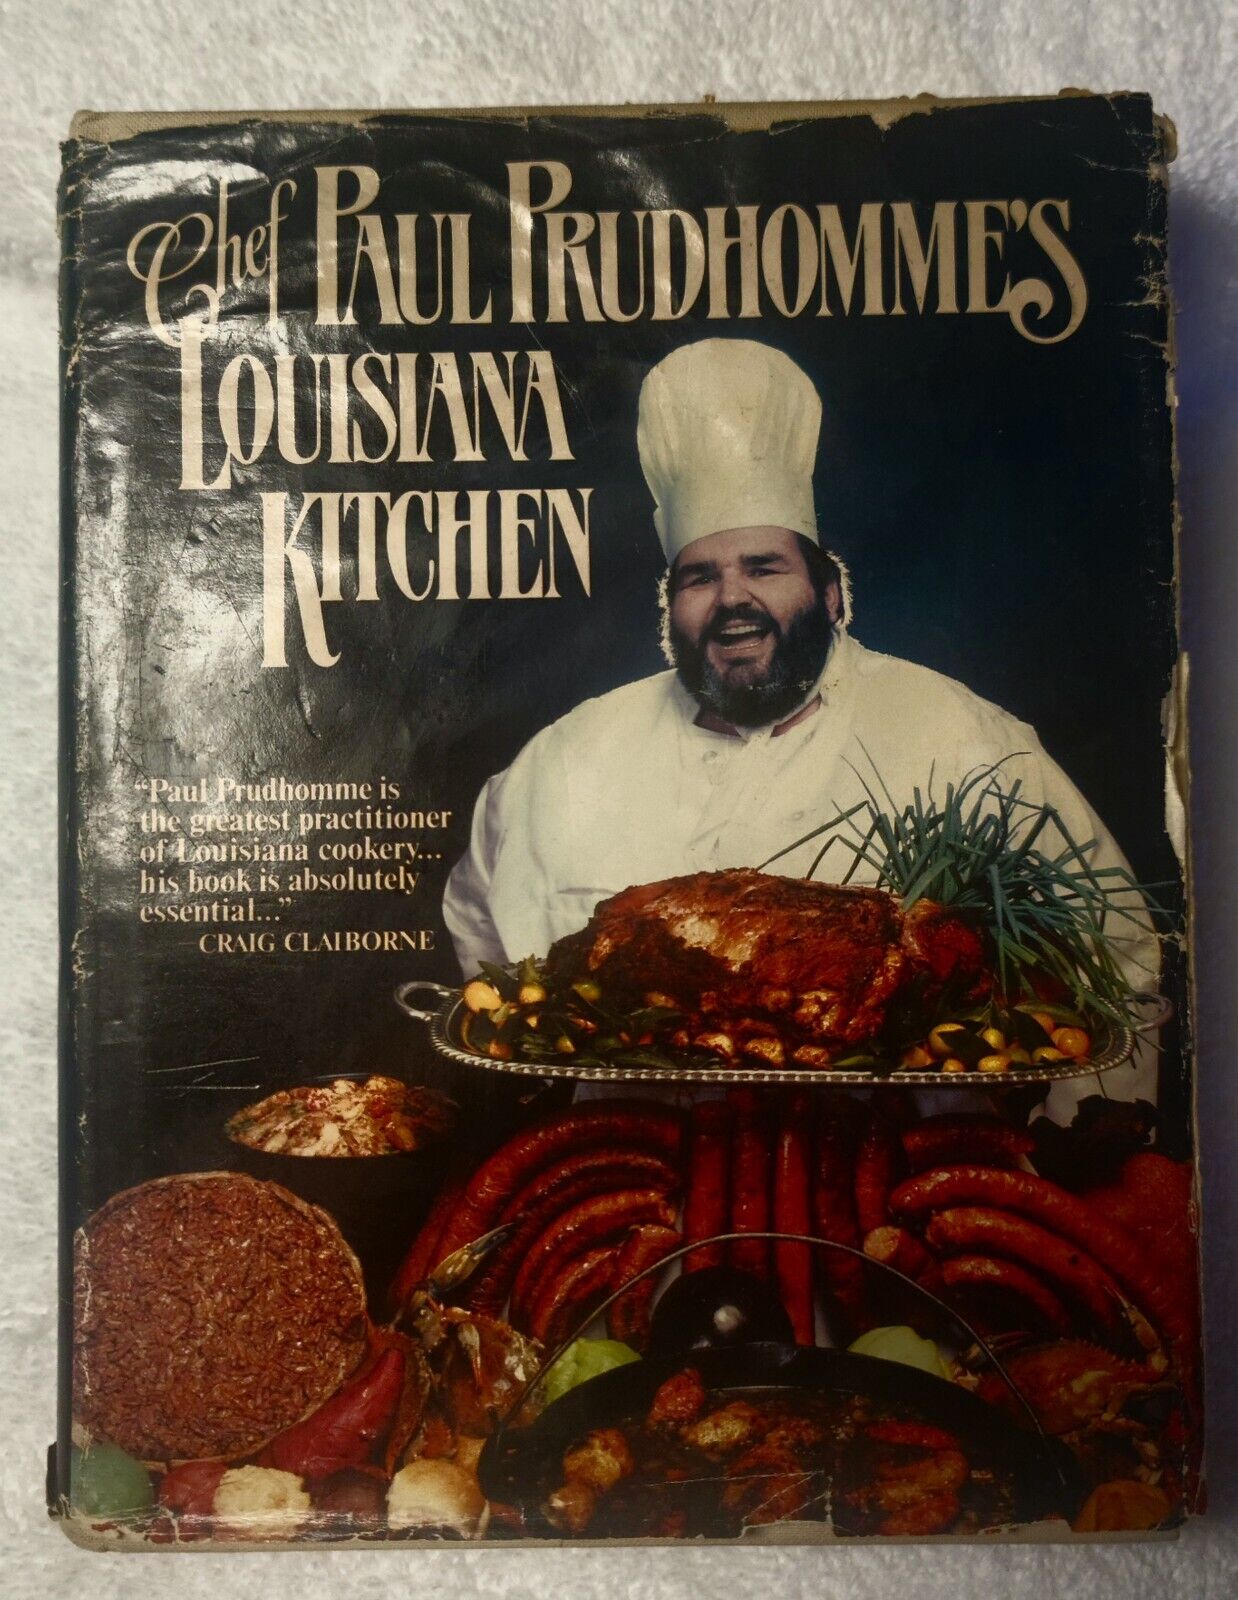 Celebrity Chef PAUL PRUDHOMME signed PRUDHOMME's LOUISIANA KITCHEN 1984  Book 